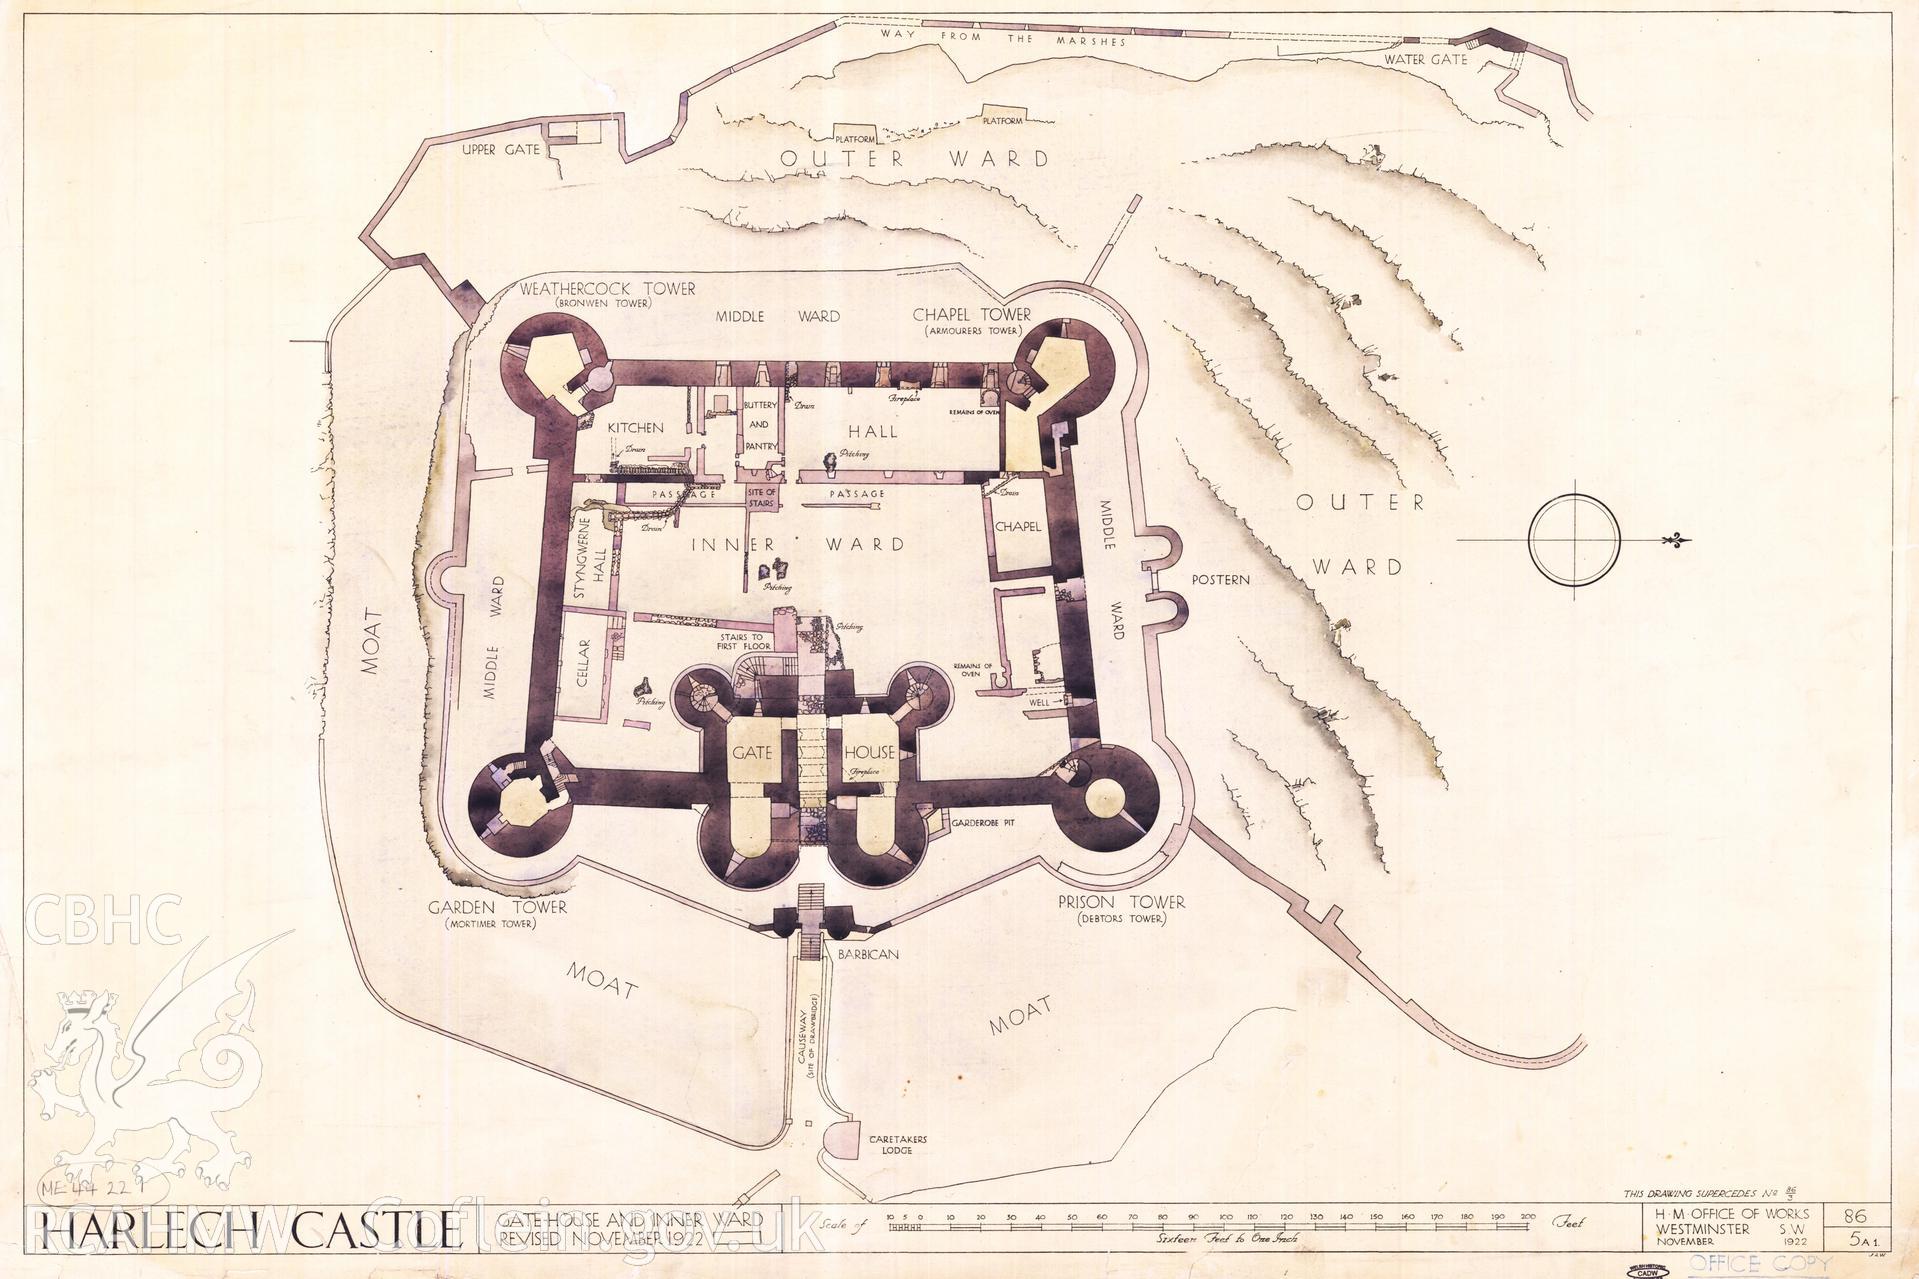 Cadw guardianship monument drawing of Harlech Castle. General plan (tinted). Cadw Ref. No:86/5A1. Scale 1:192.